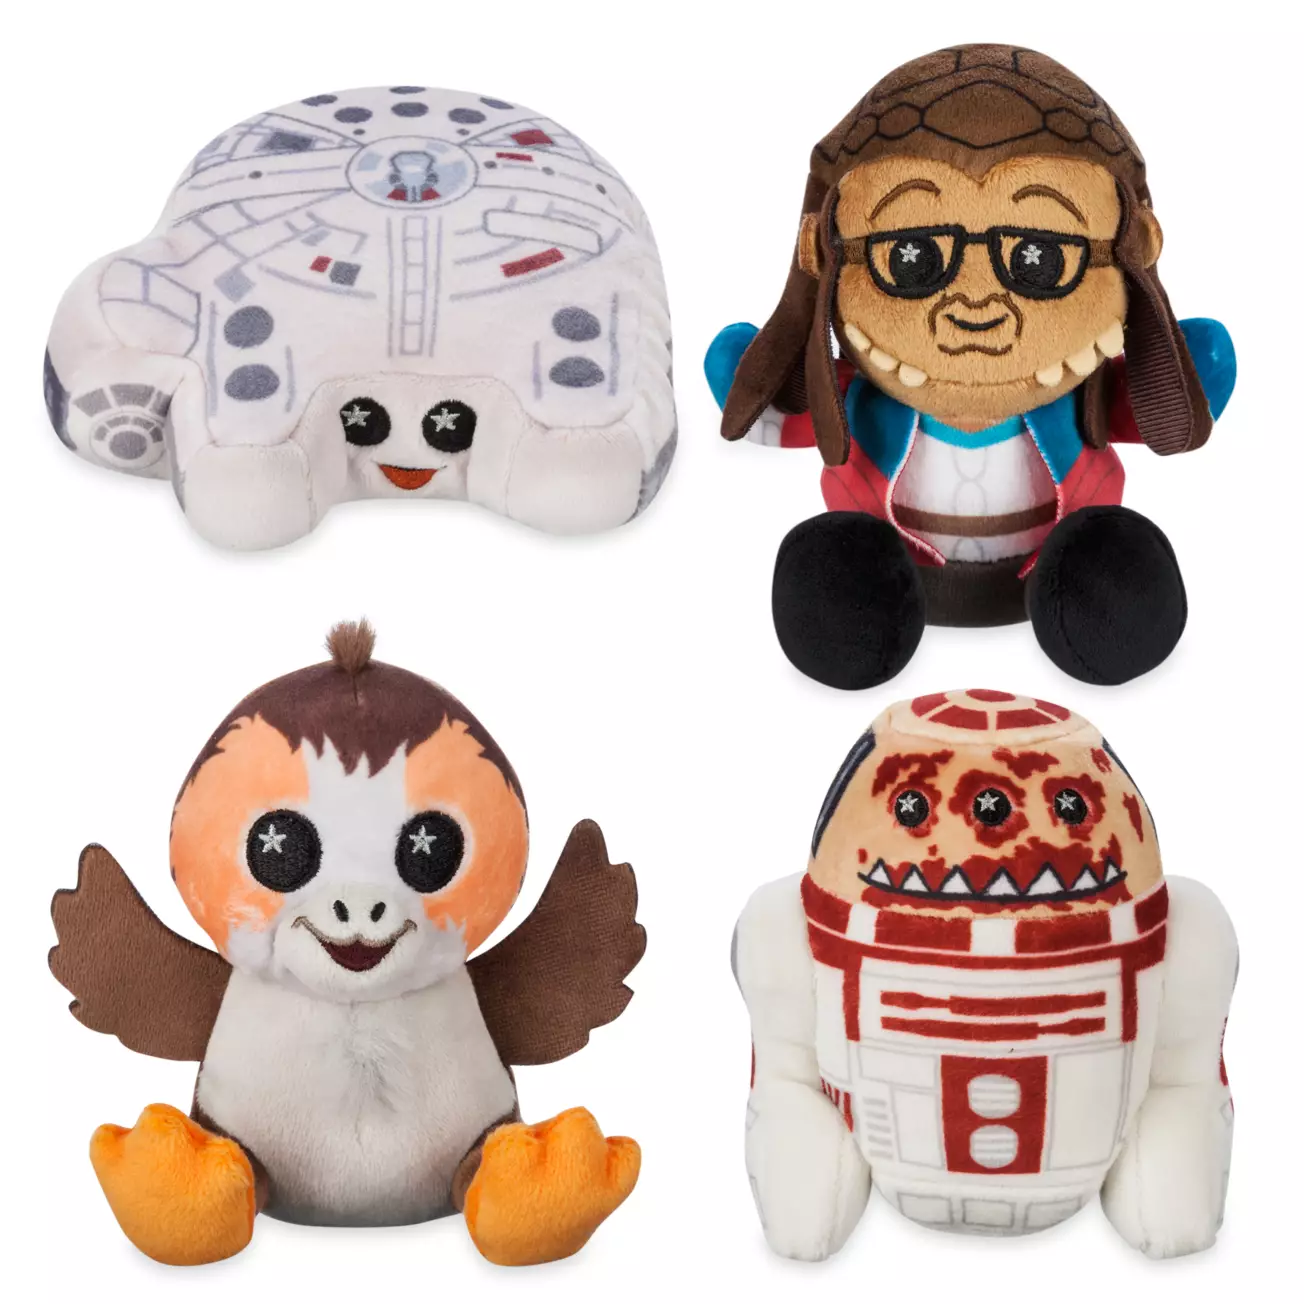 SWGE Millennium Falcon: Smugglers Run Wishables Plush Toy 4-Pack 2